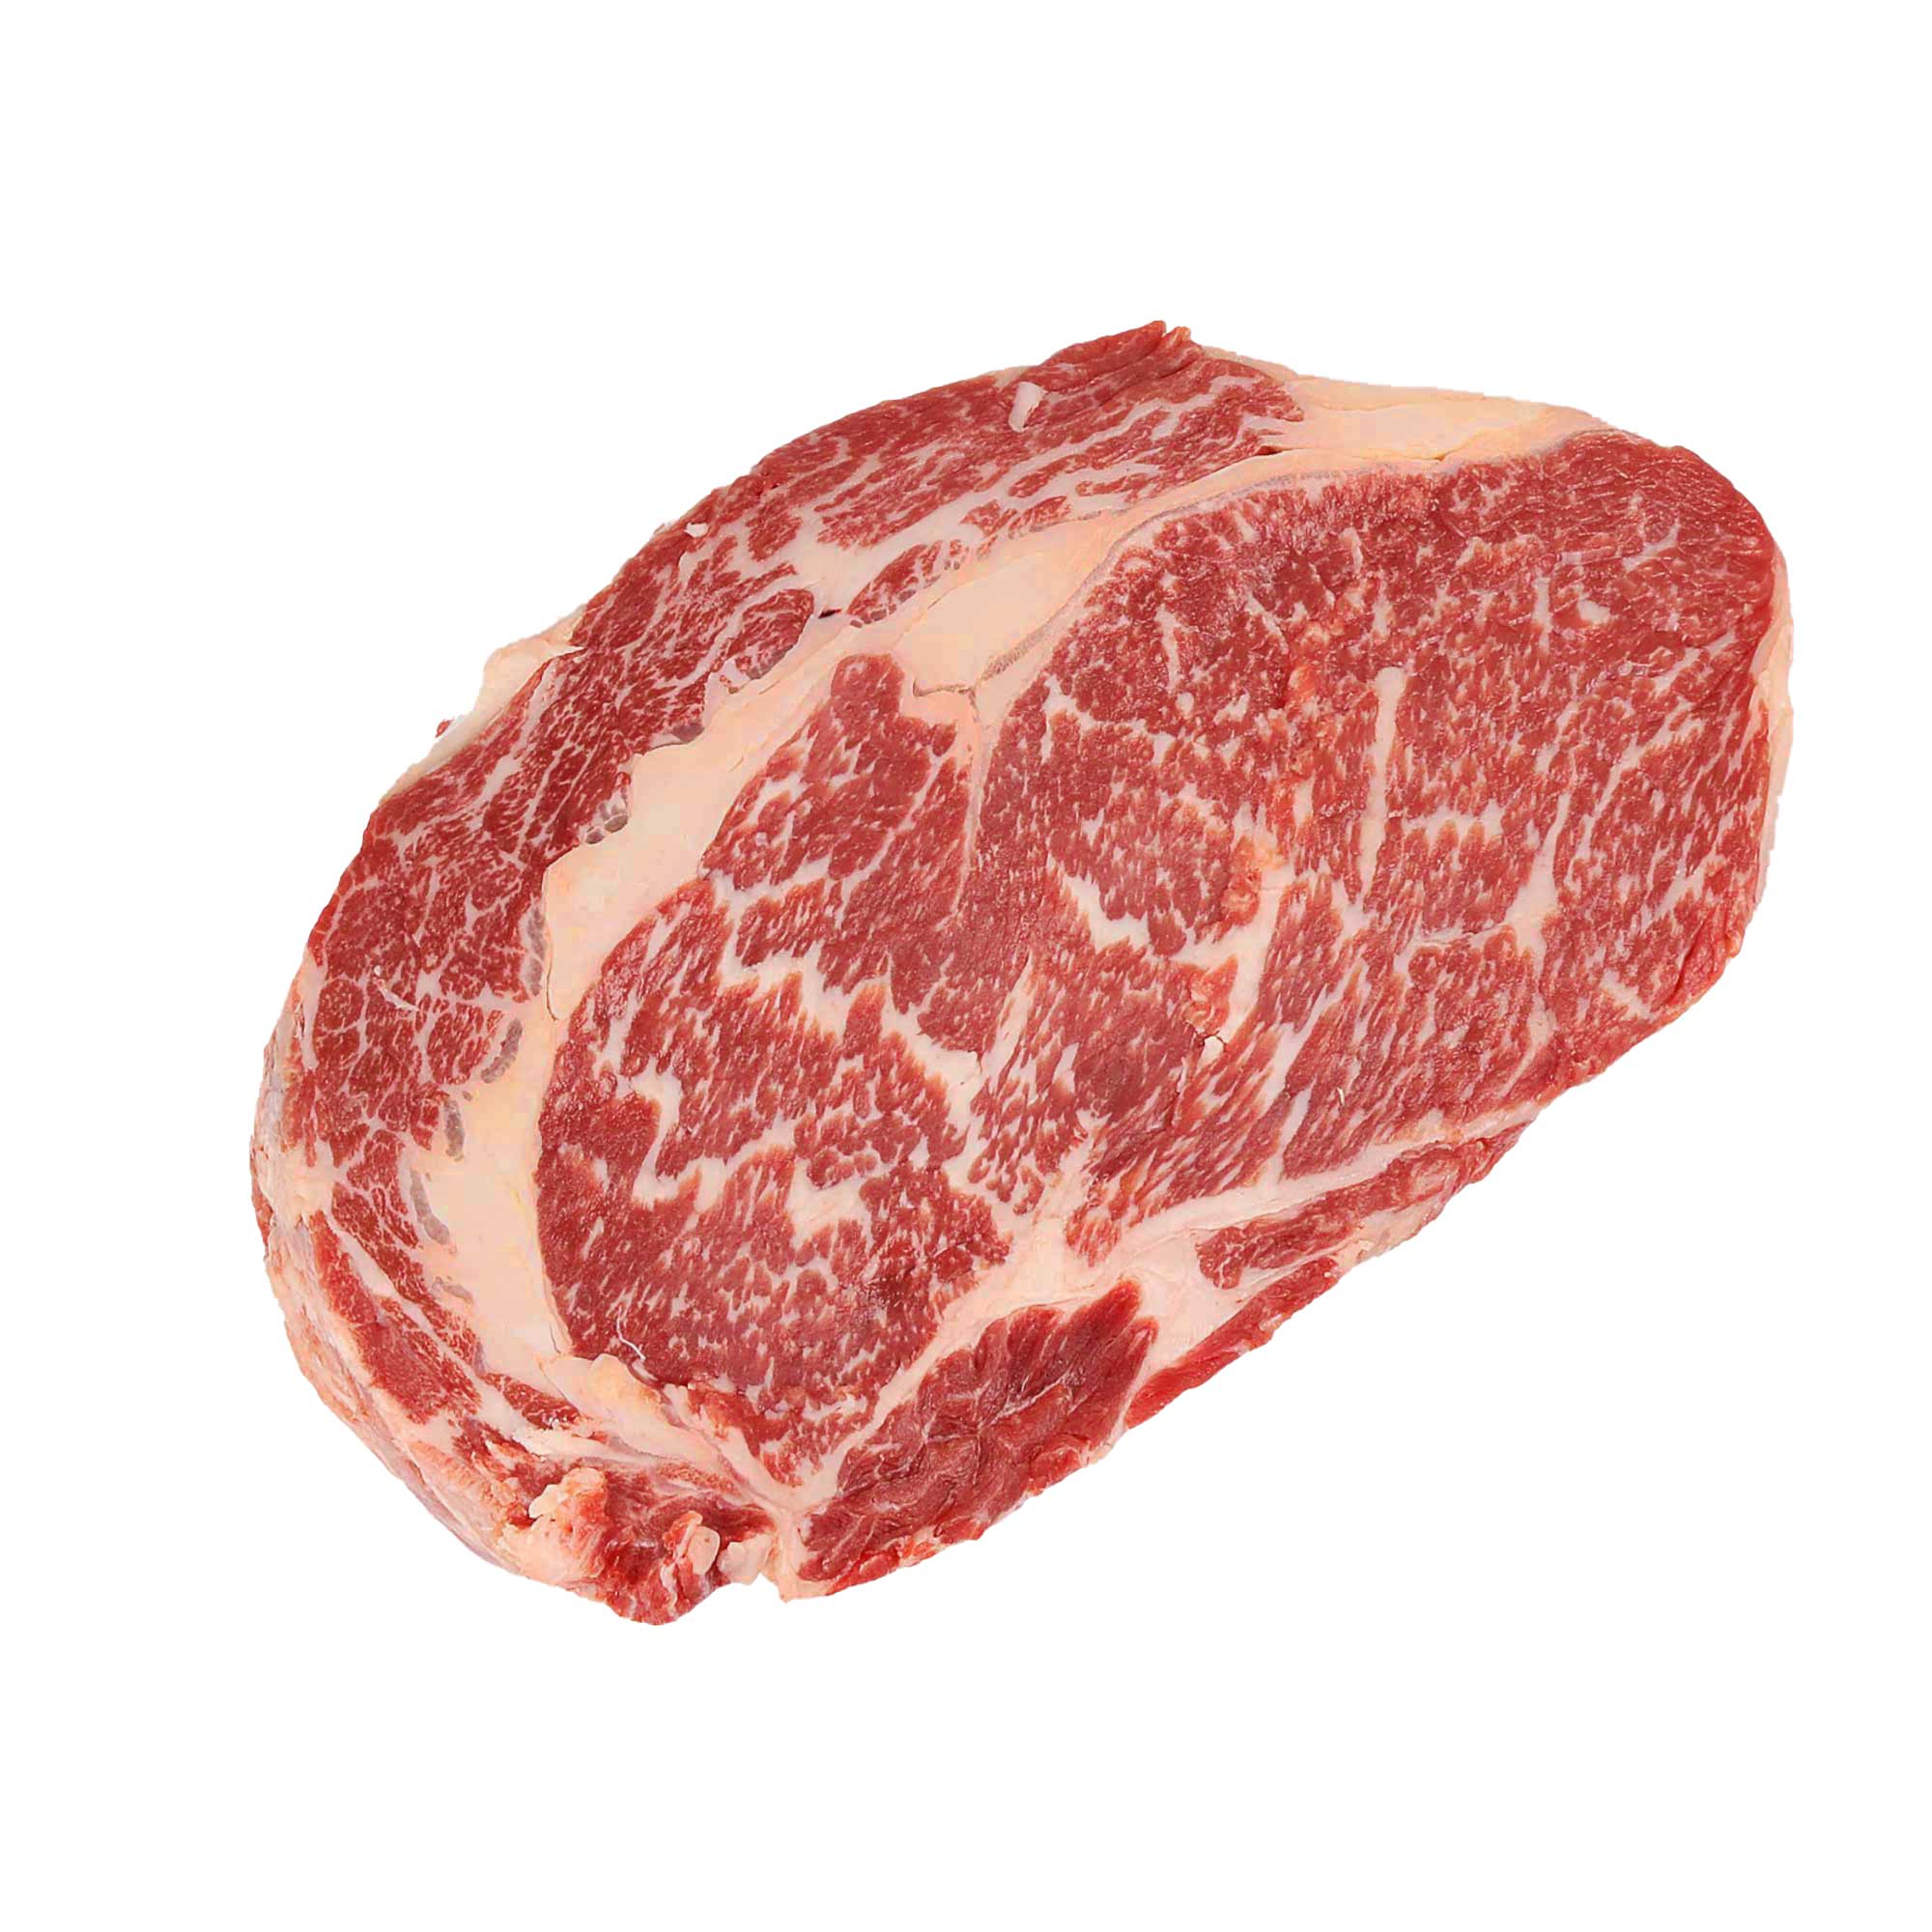 ENTRECOTE / CUBE-ROLL WAGYU USA SNAKE RIVER FARMS 9+ (GOLD LABEL) SKIN FR.